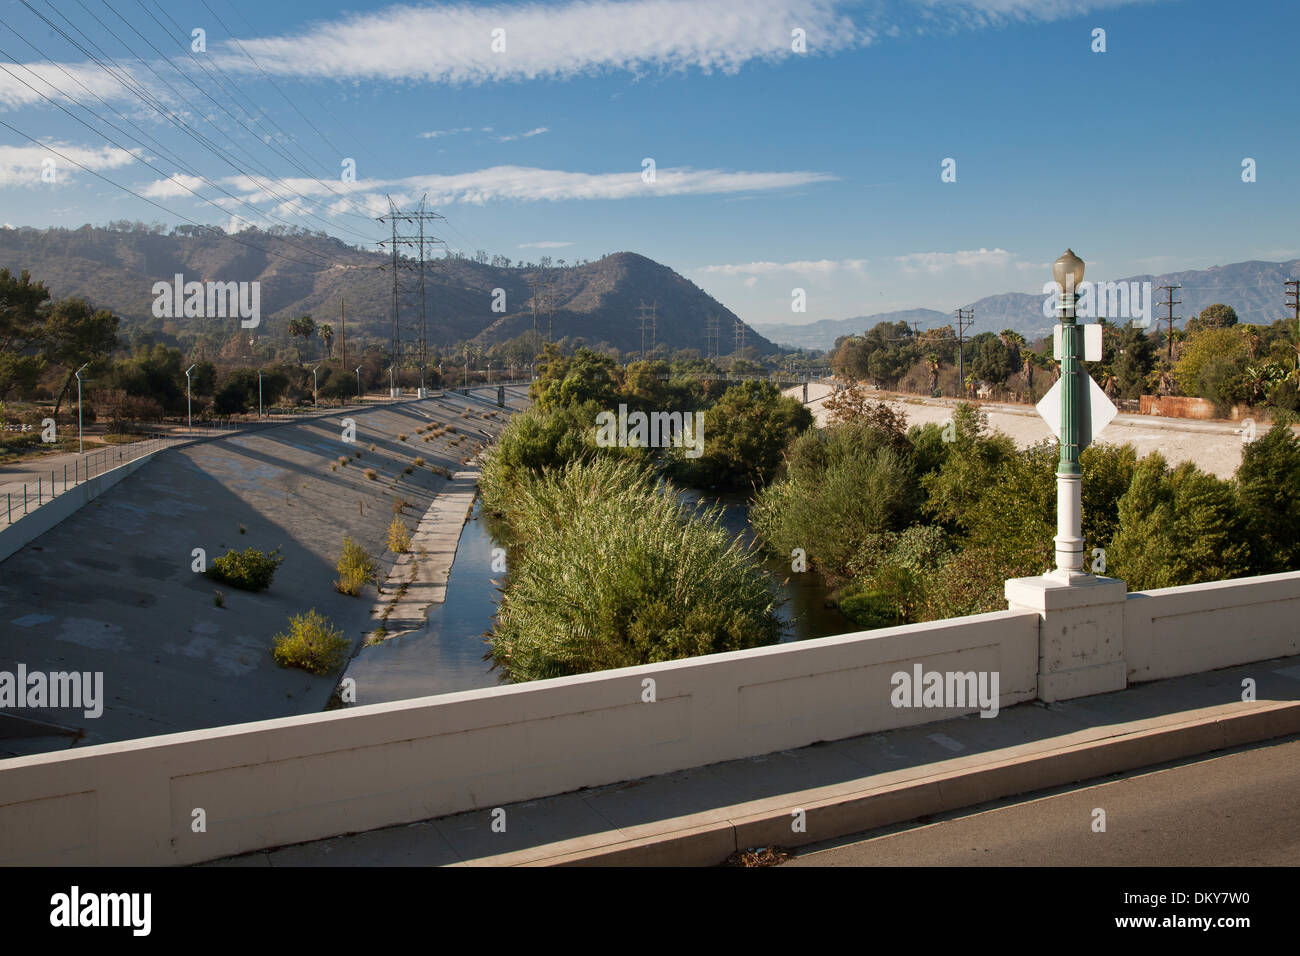 Glendale/Pont d'Hyperion, Atwater Village, Los Angeles River, California, USA Banque D'Images